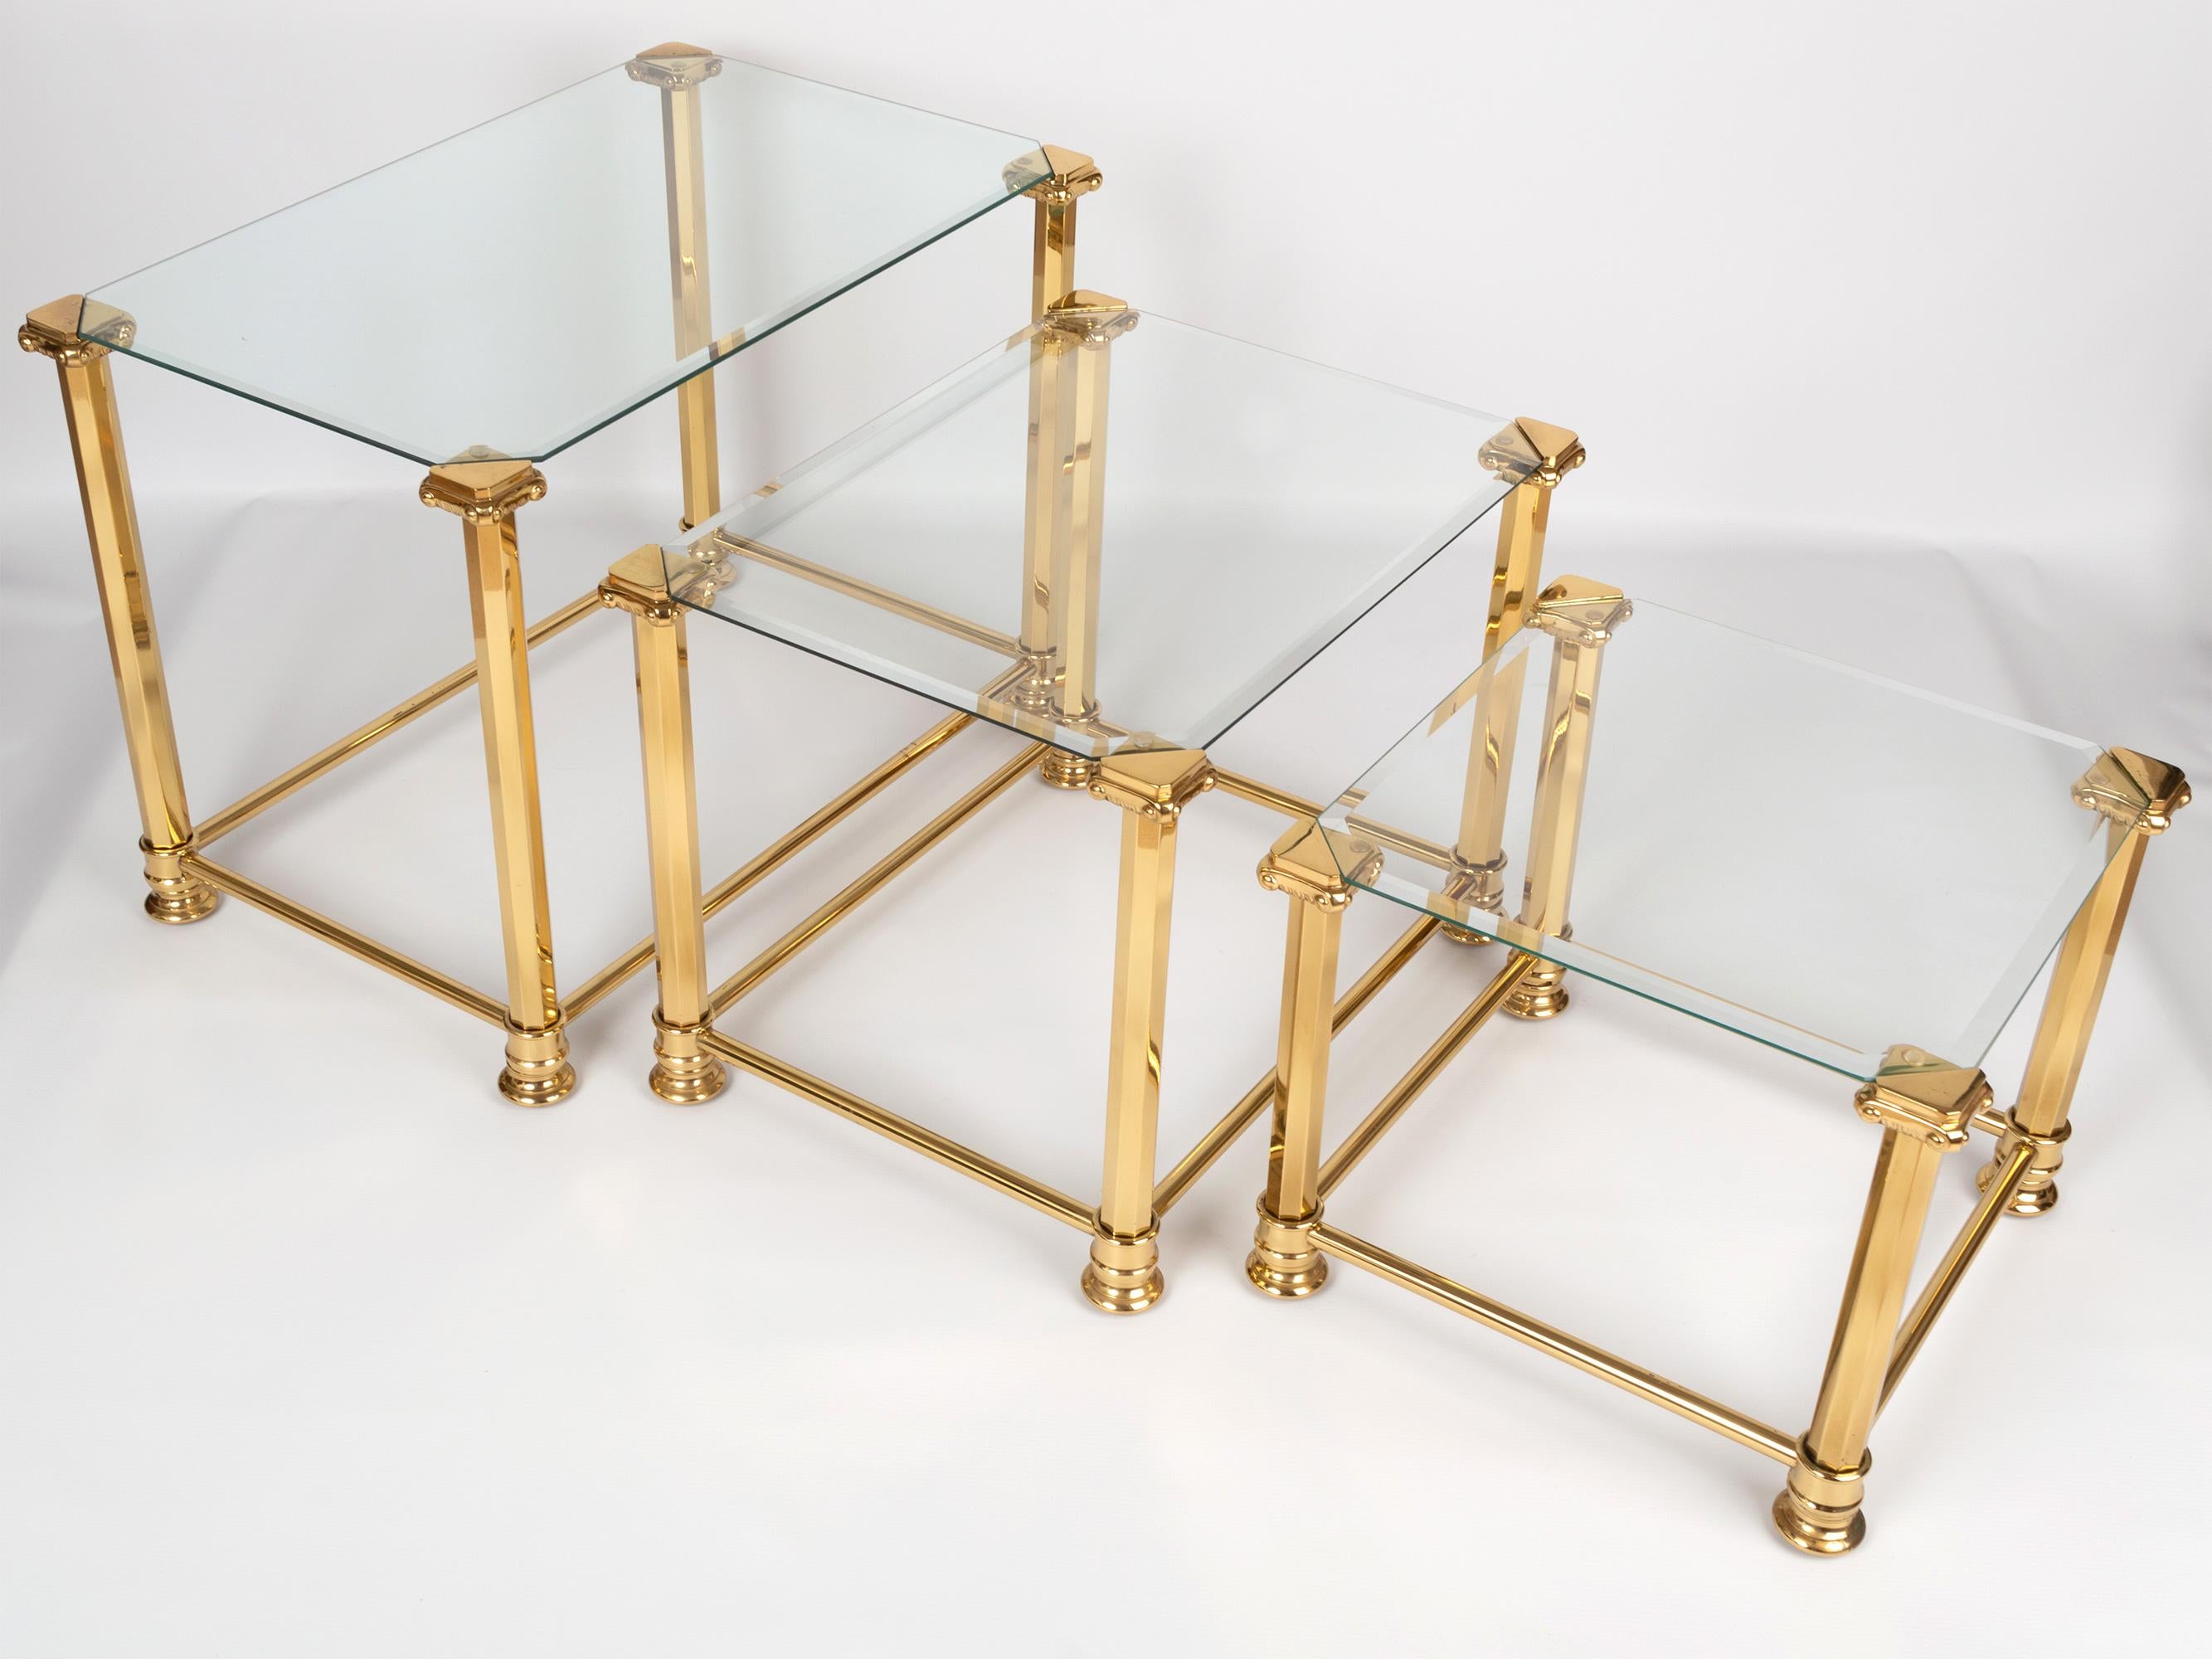 Mid-Century Modern trio of gold plated gilt and glass side tables by Orsenigo, Milan. Italy, circa 1970.
Very good vintage condition with minor signs of wear commensurate of age.
Dimensions:
H 44 x W 52.5 x D 32.5cm
H 40 x W 45.5 x D 29.5cm
H 36 x W